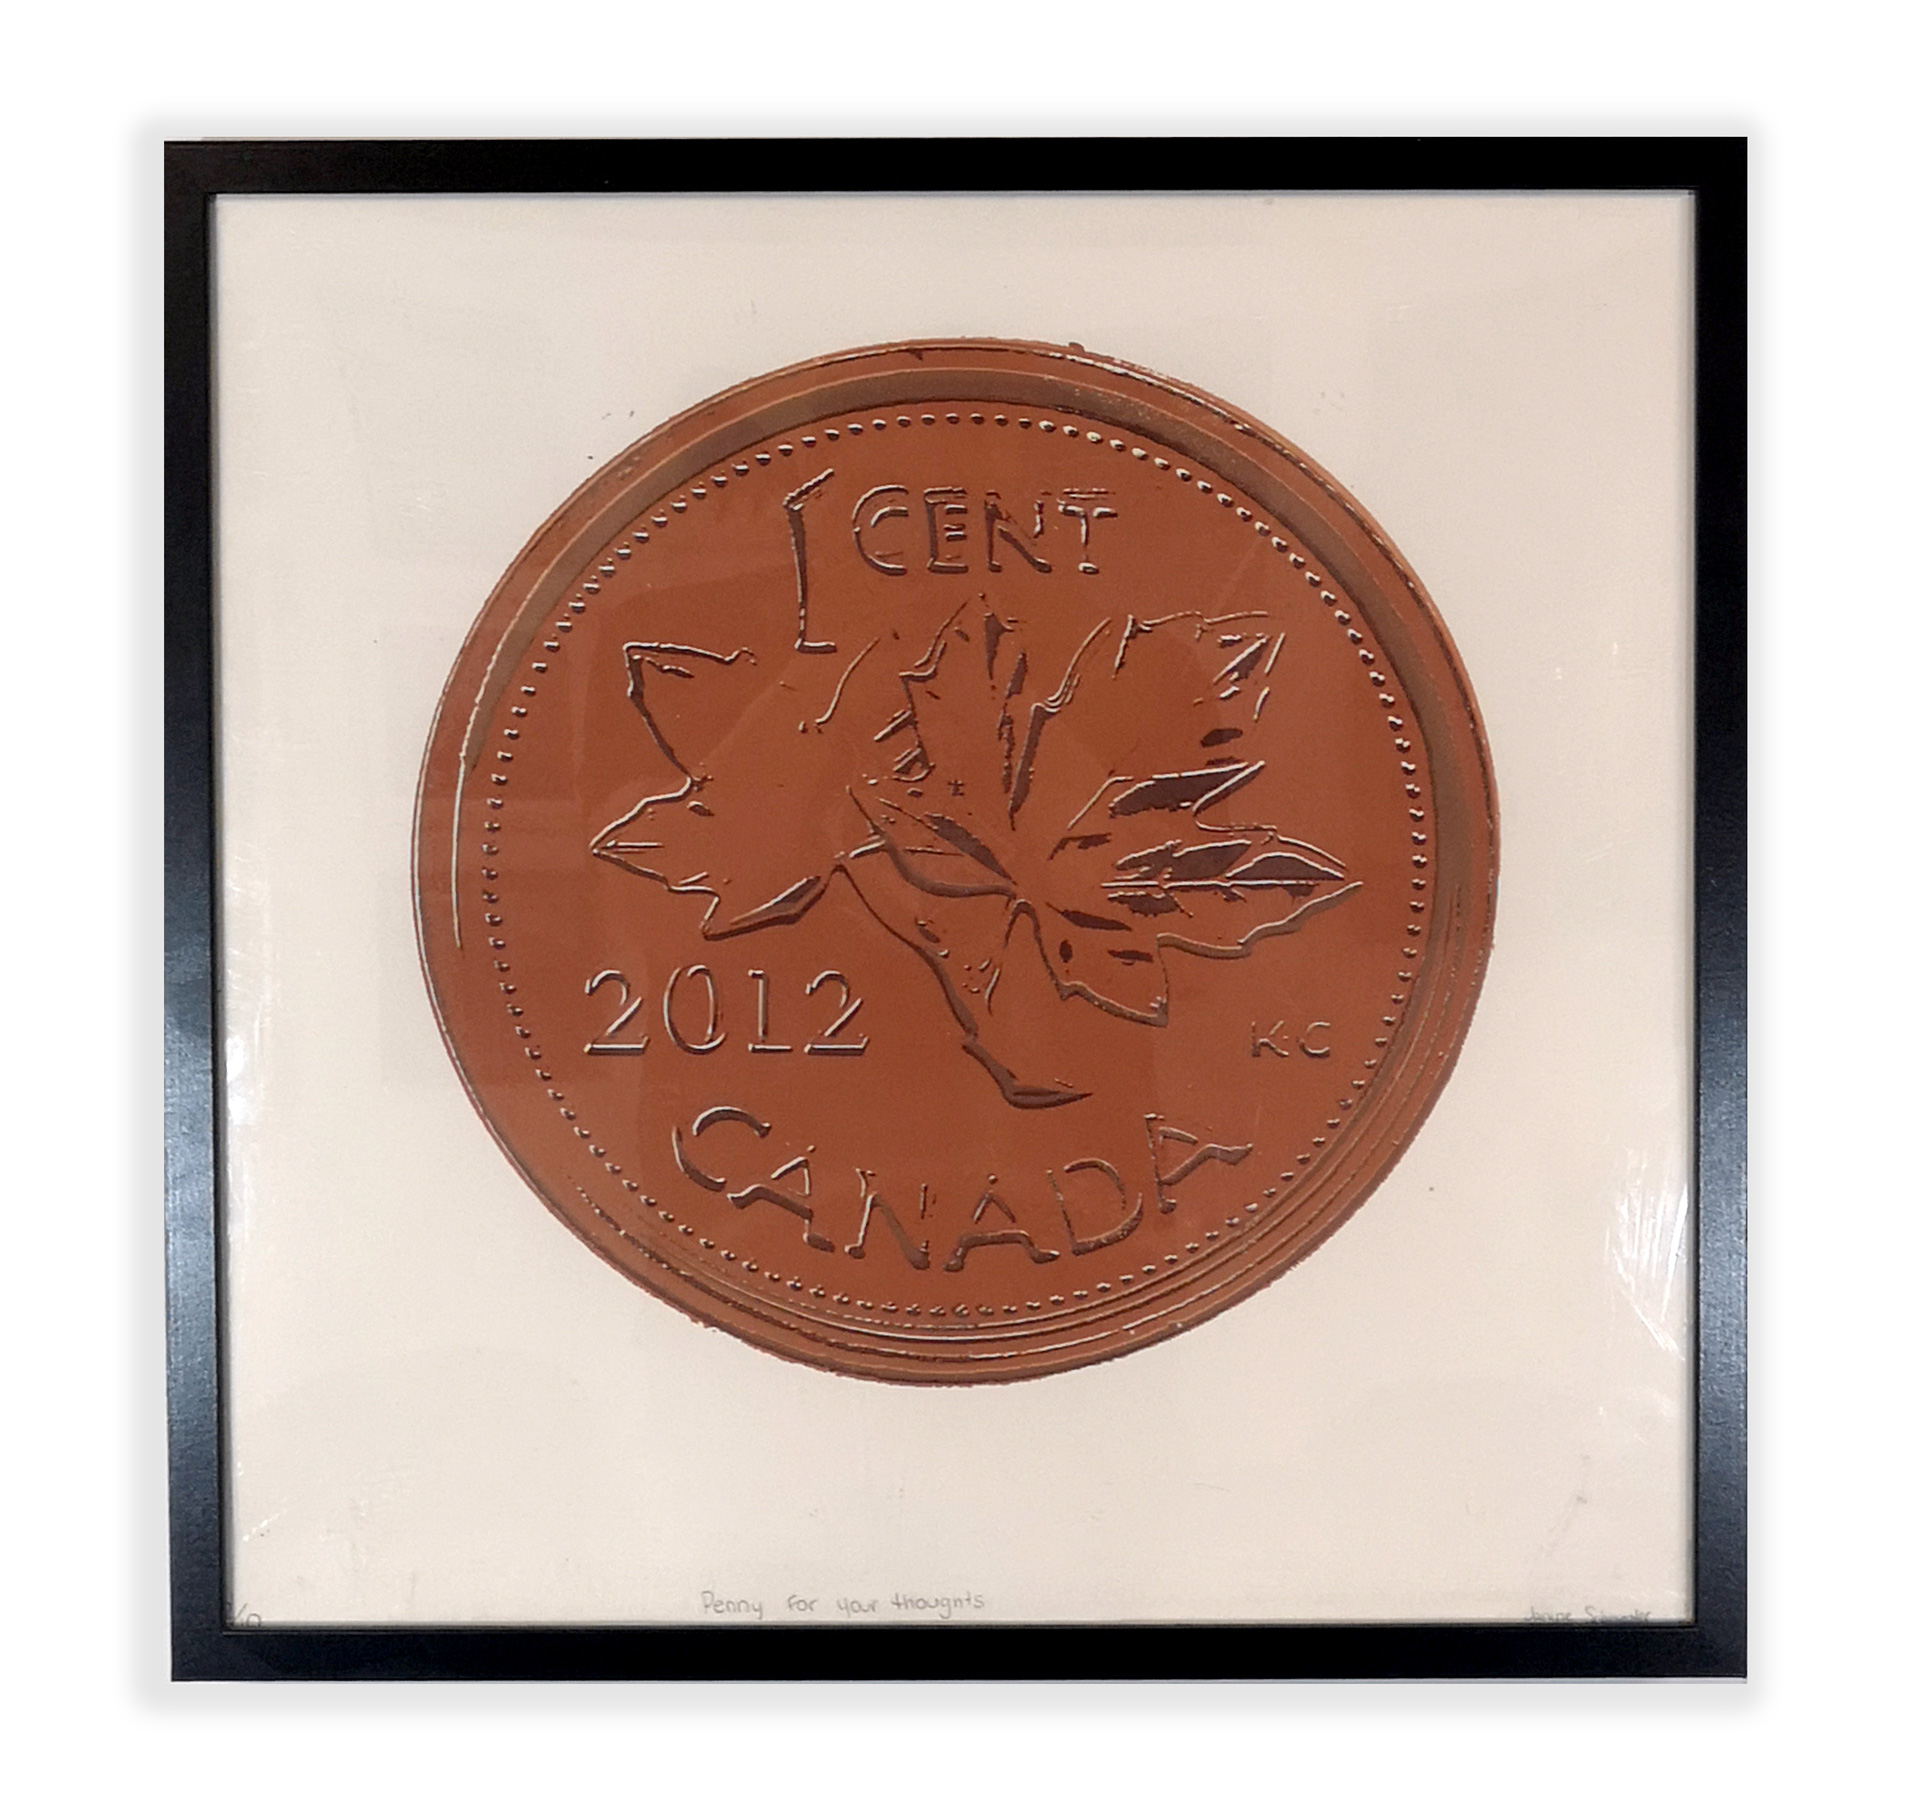 A screenprint of a 1 cent Canadian penny from 2012 with maple leaves in the centre